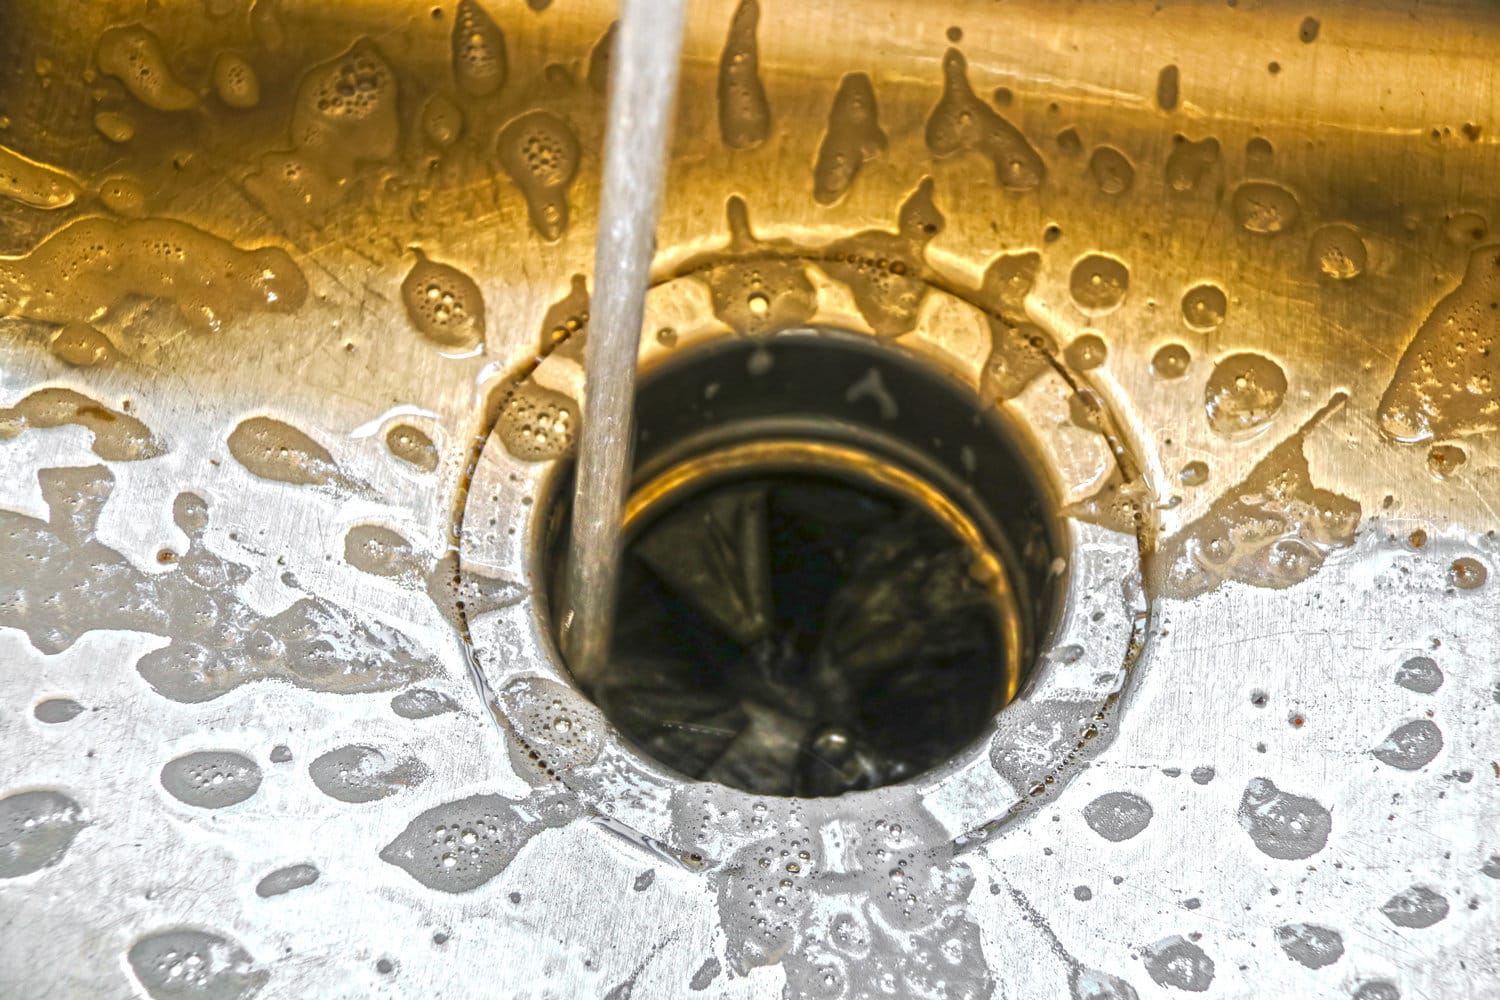 Aater spraying into a garbage disposal in stainless steel sink with water and bubbles pooling and running on surface - some grain and movement blur from water